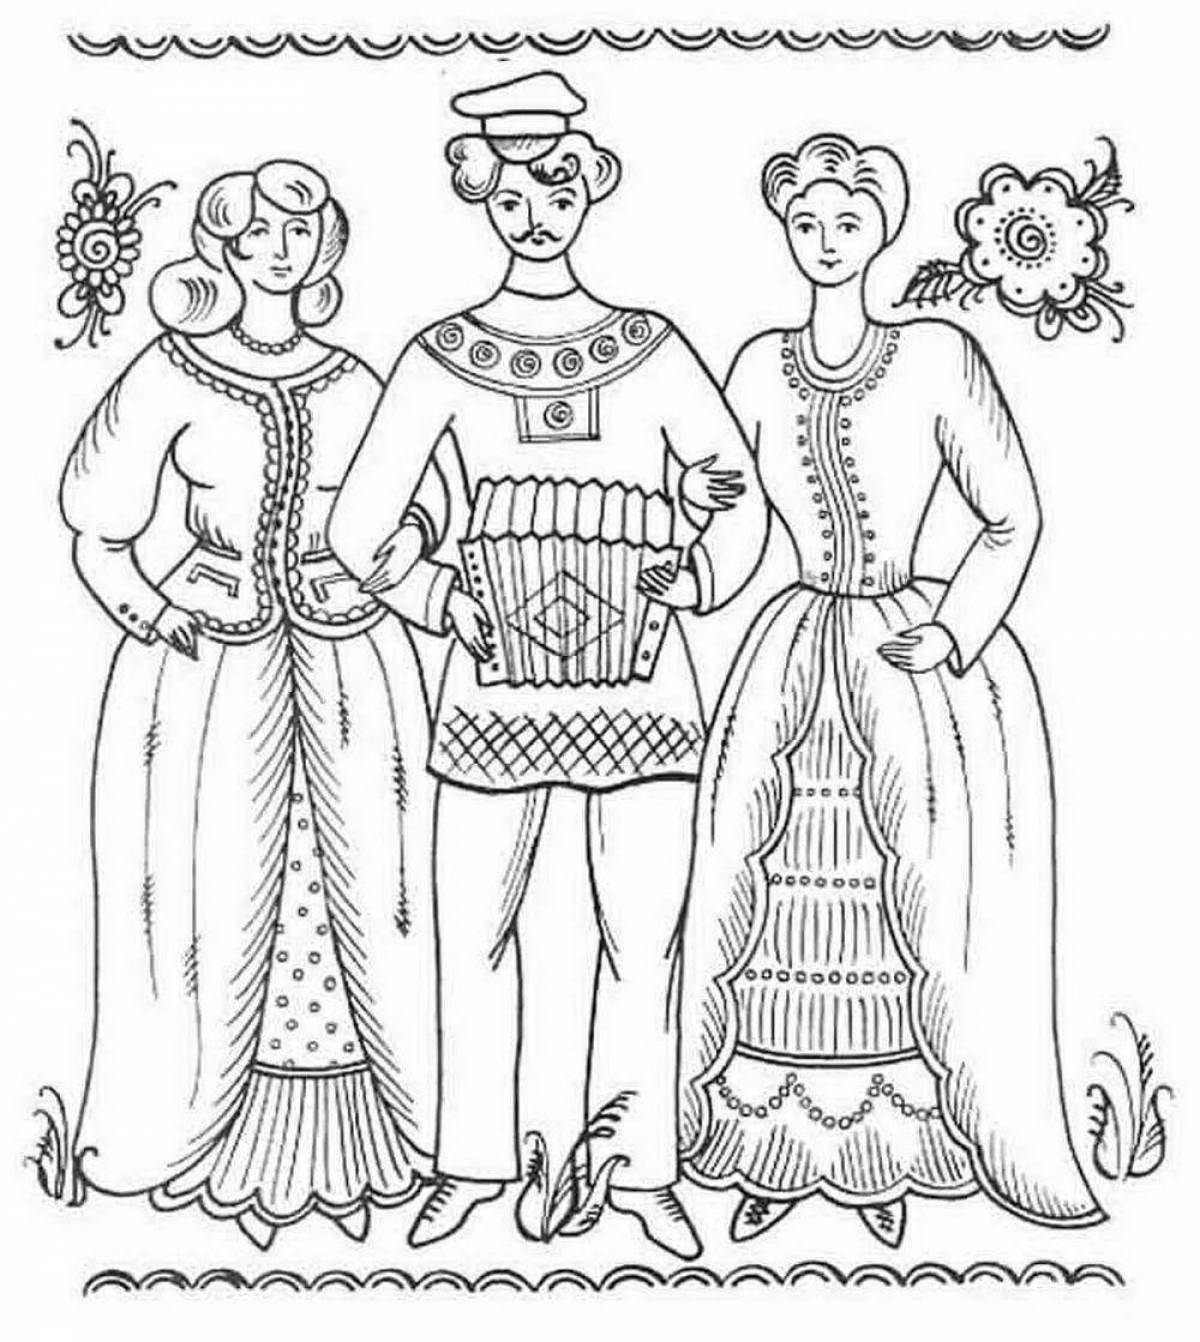 Coloring page charming women's Russian folk costume